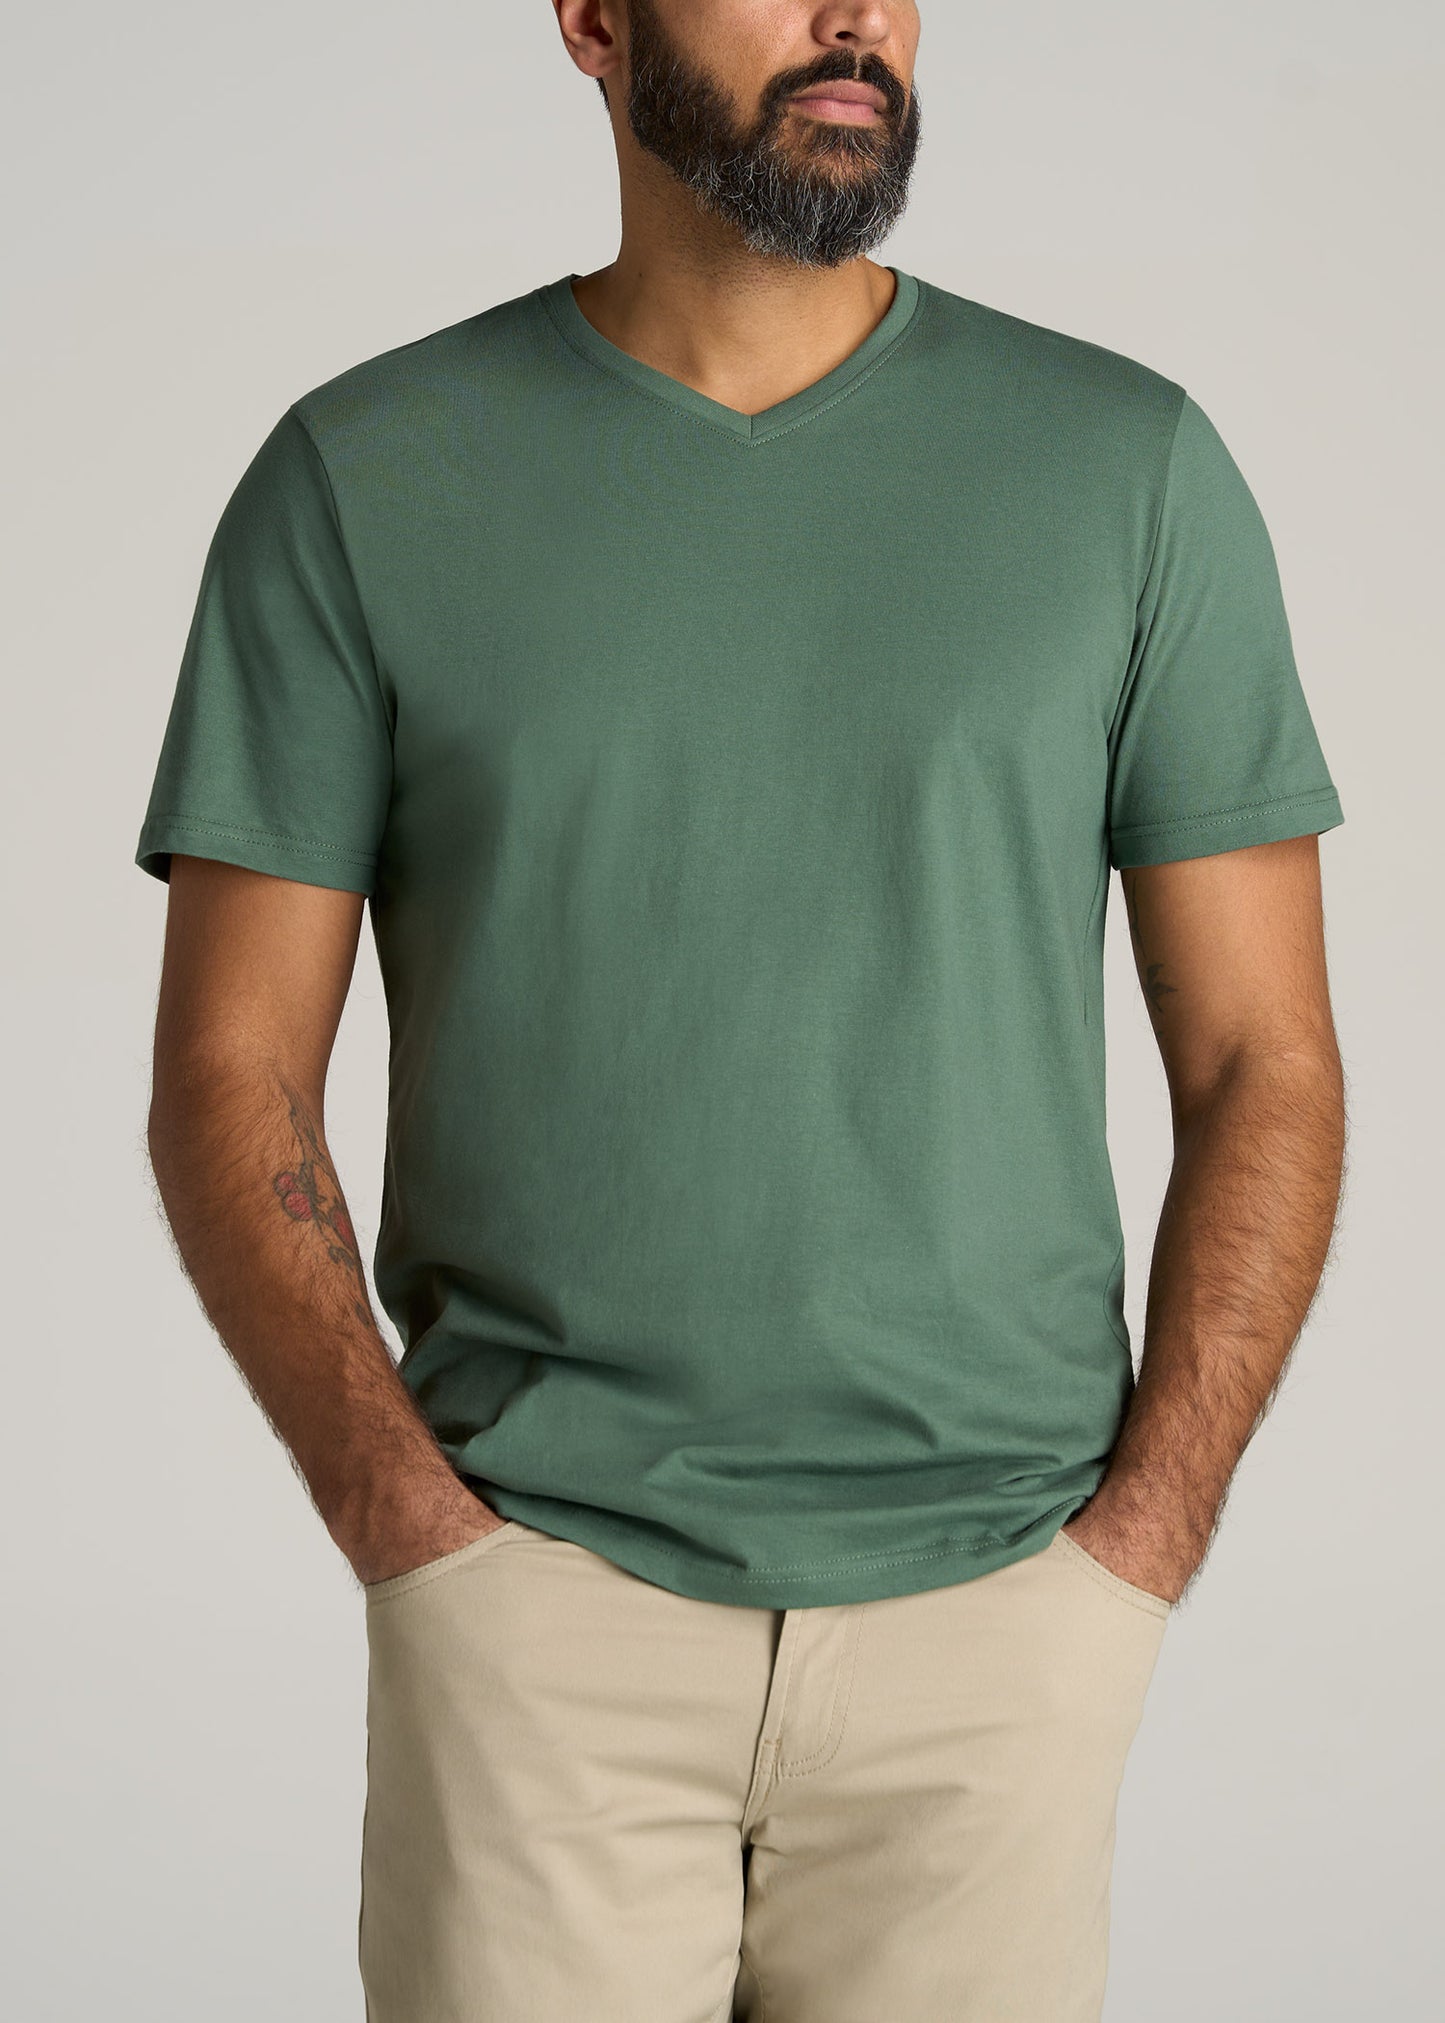 A tall man wearing American Tall's The Everyday REGULAR-FIT V-Neck Tall Men's T-Shirt in Forest Green.